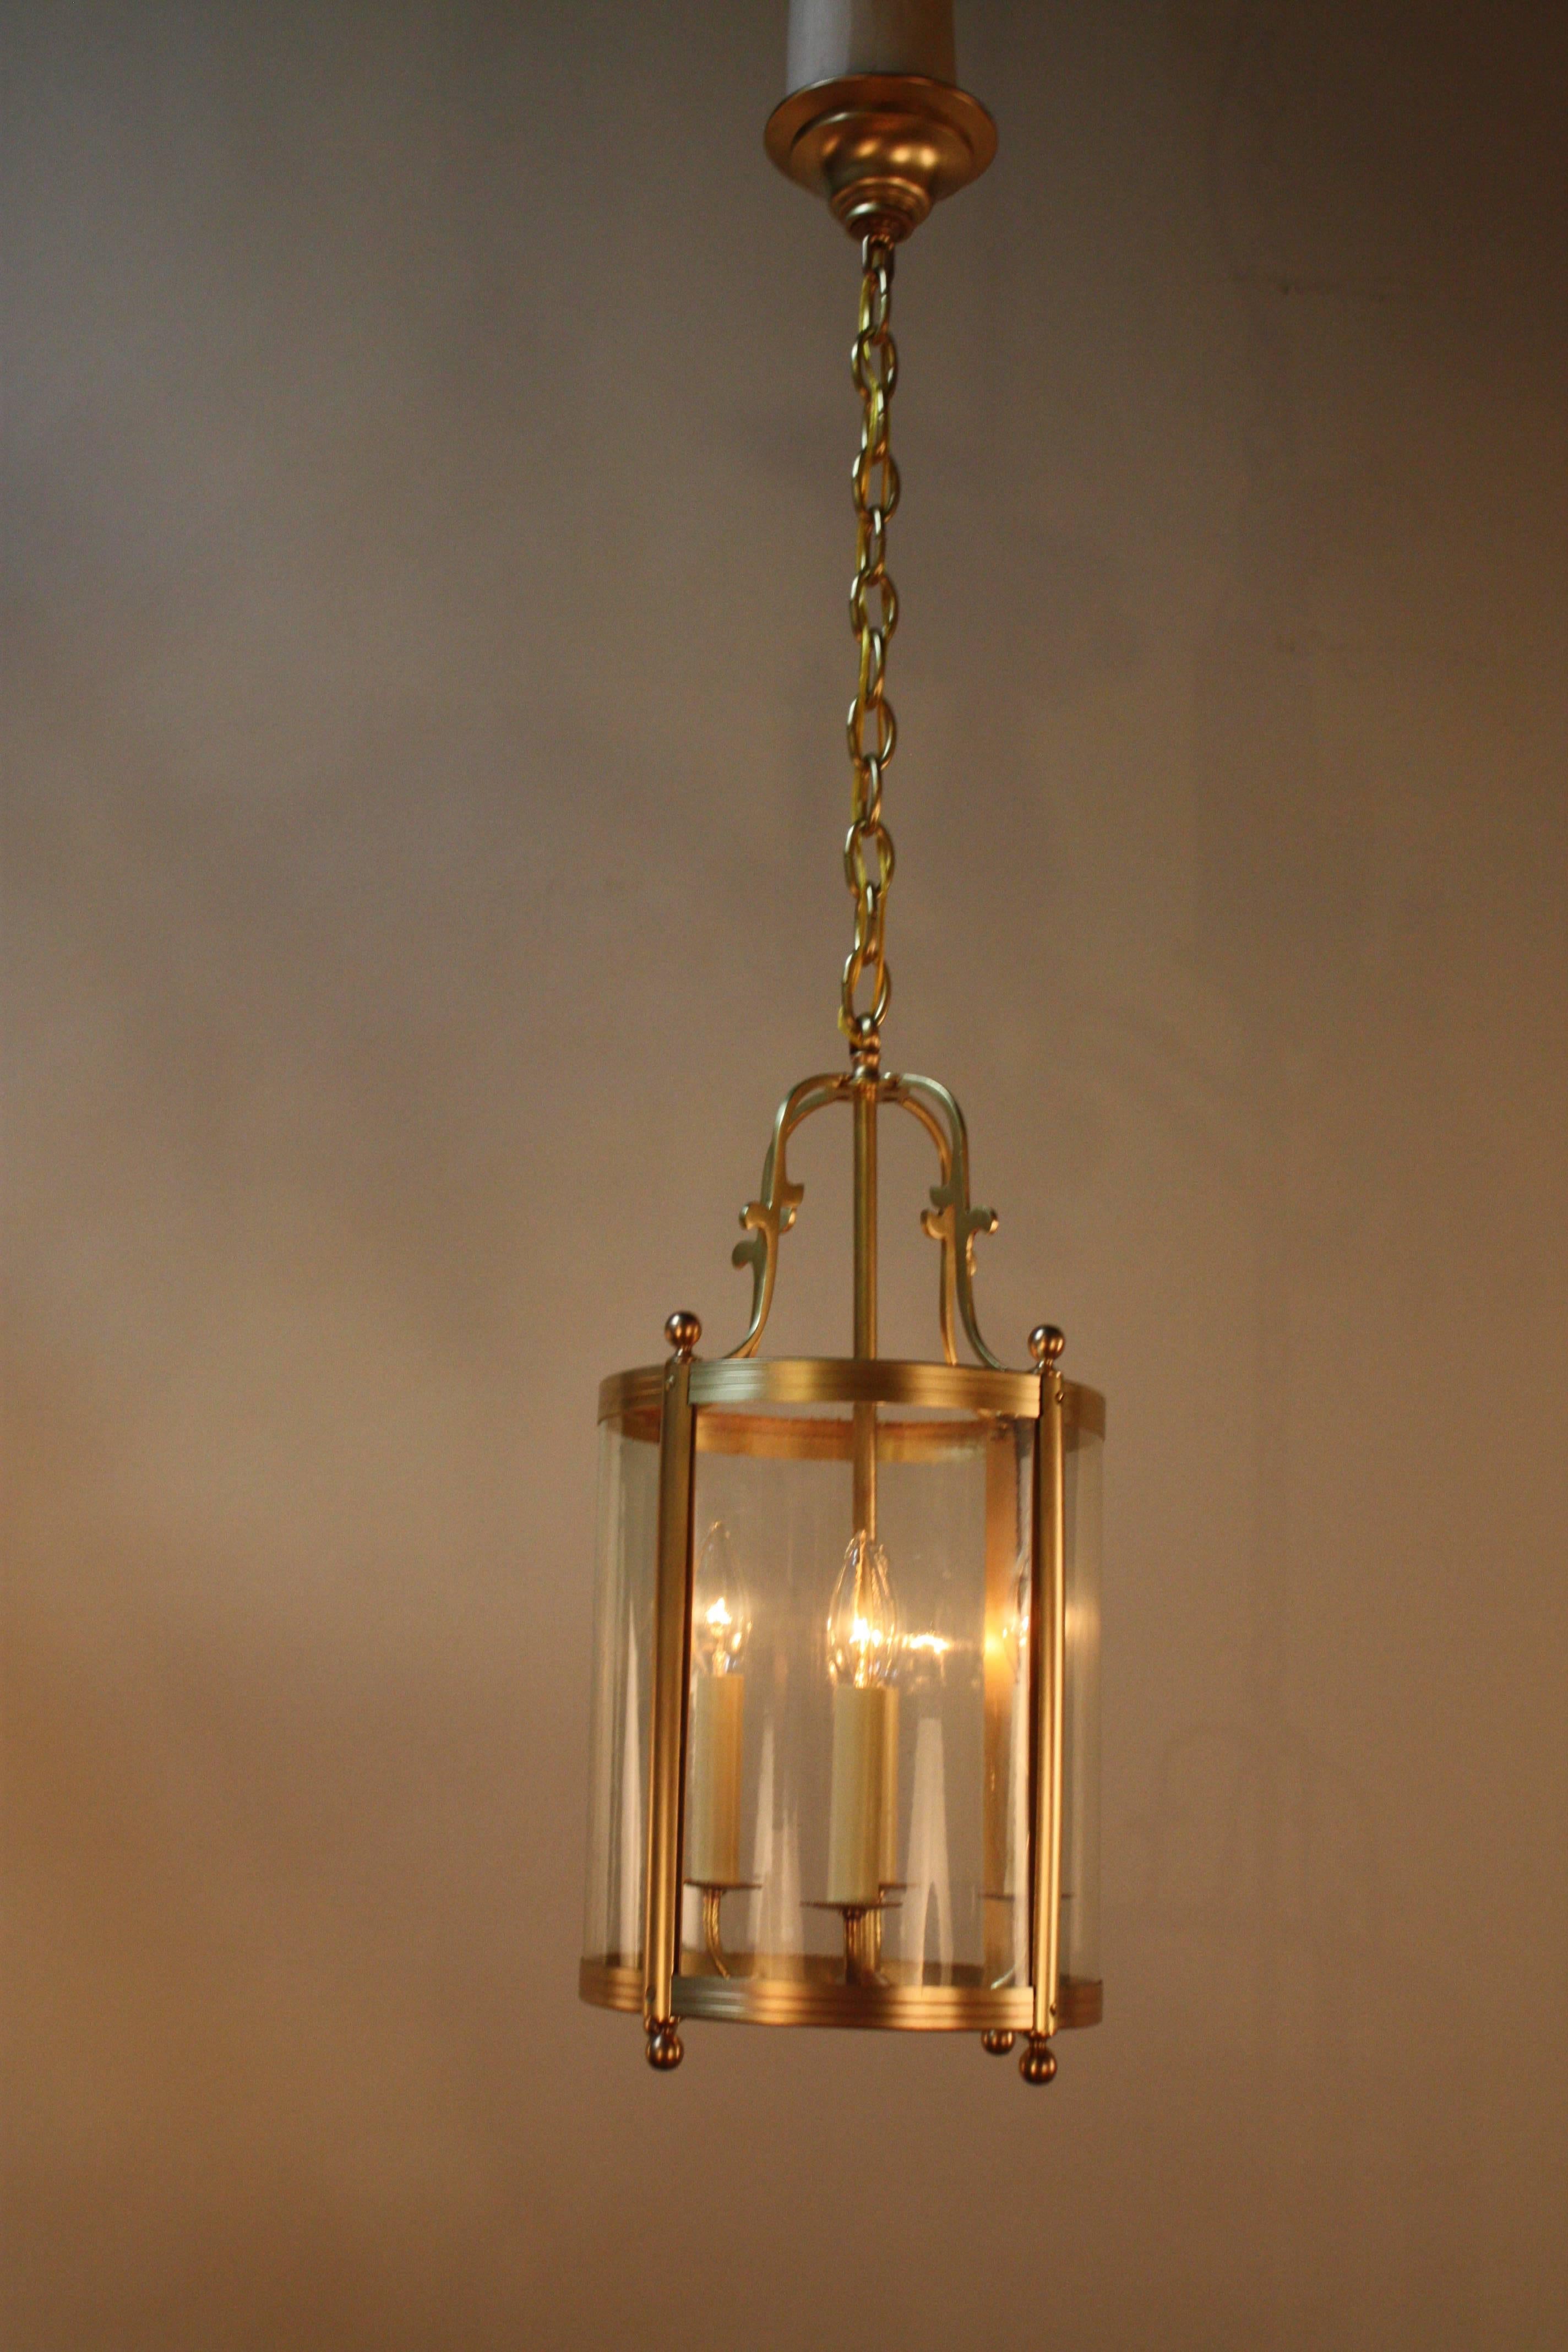 Elegant 1920s four-light bronze and hand bent glass (has small bubbles in the glass copy of 18th century glass) lantern.